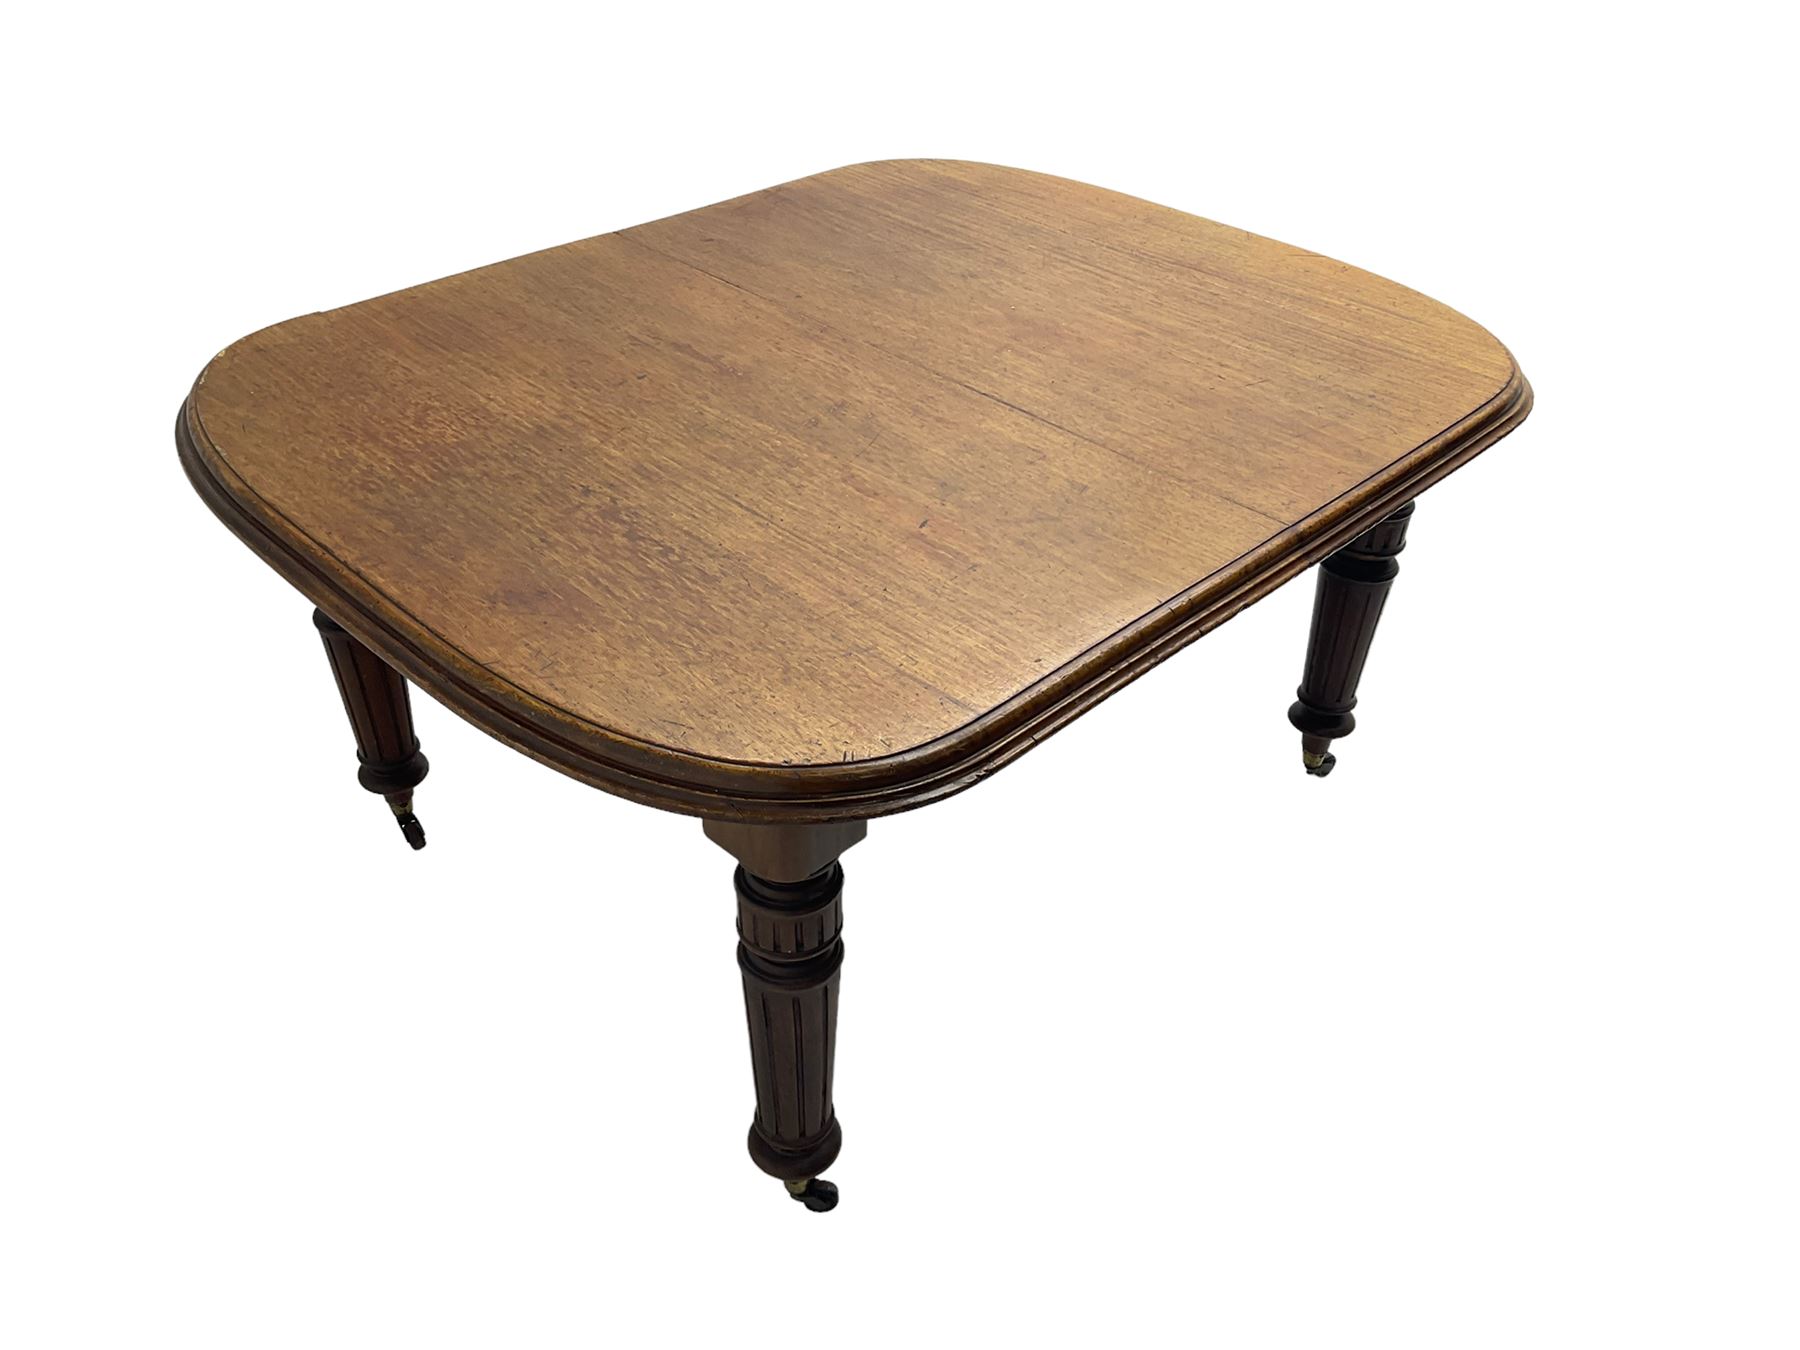 19th century mahogany extending dining table - Image 4 of 6